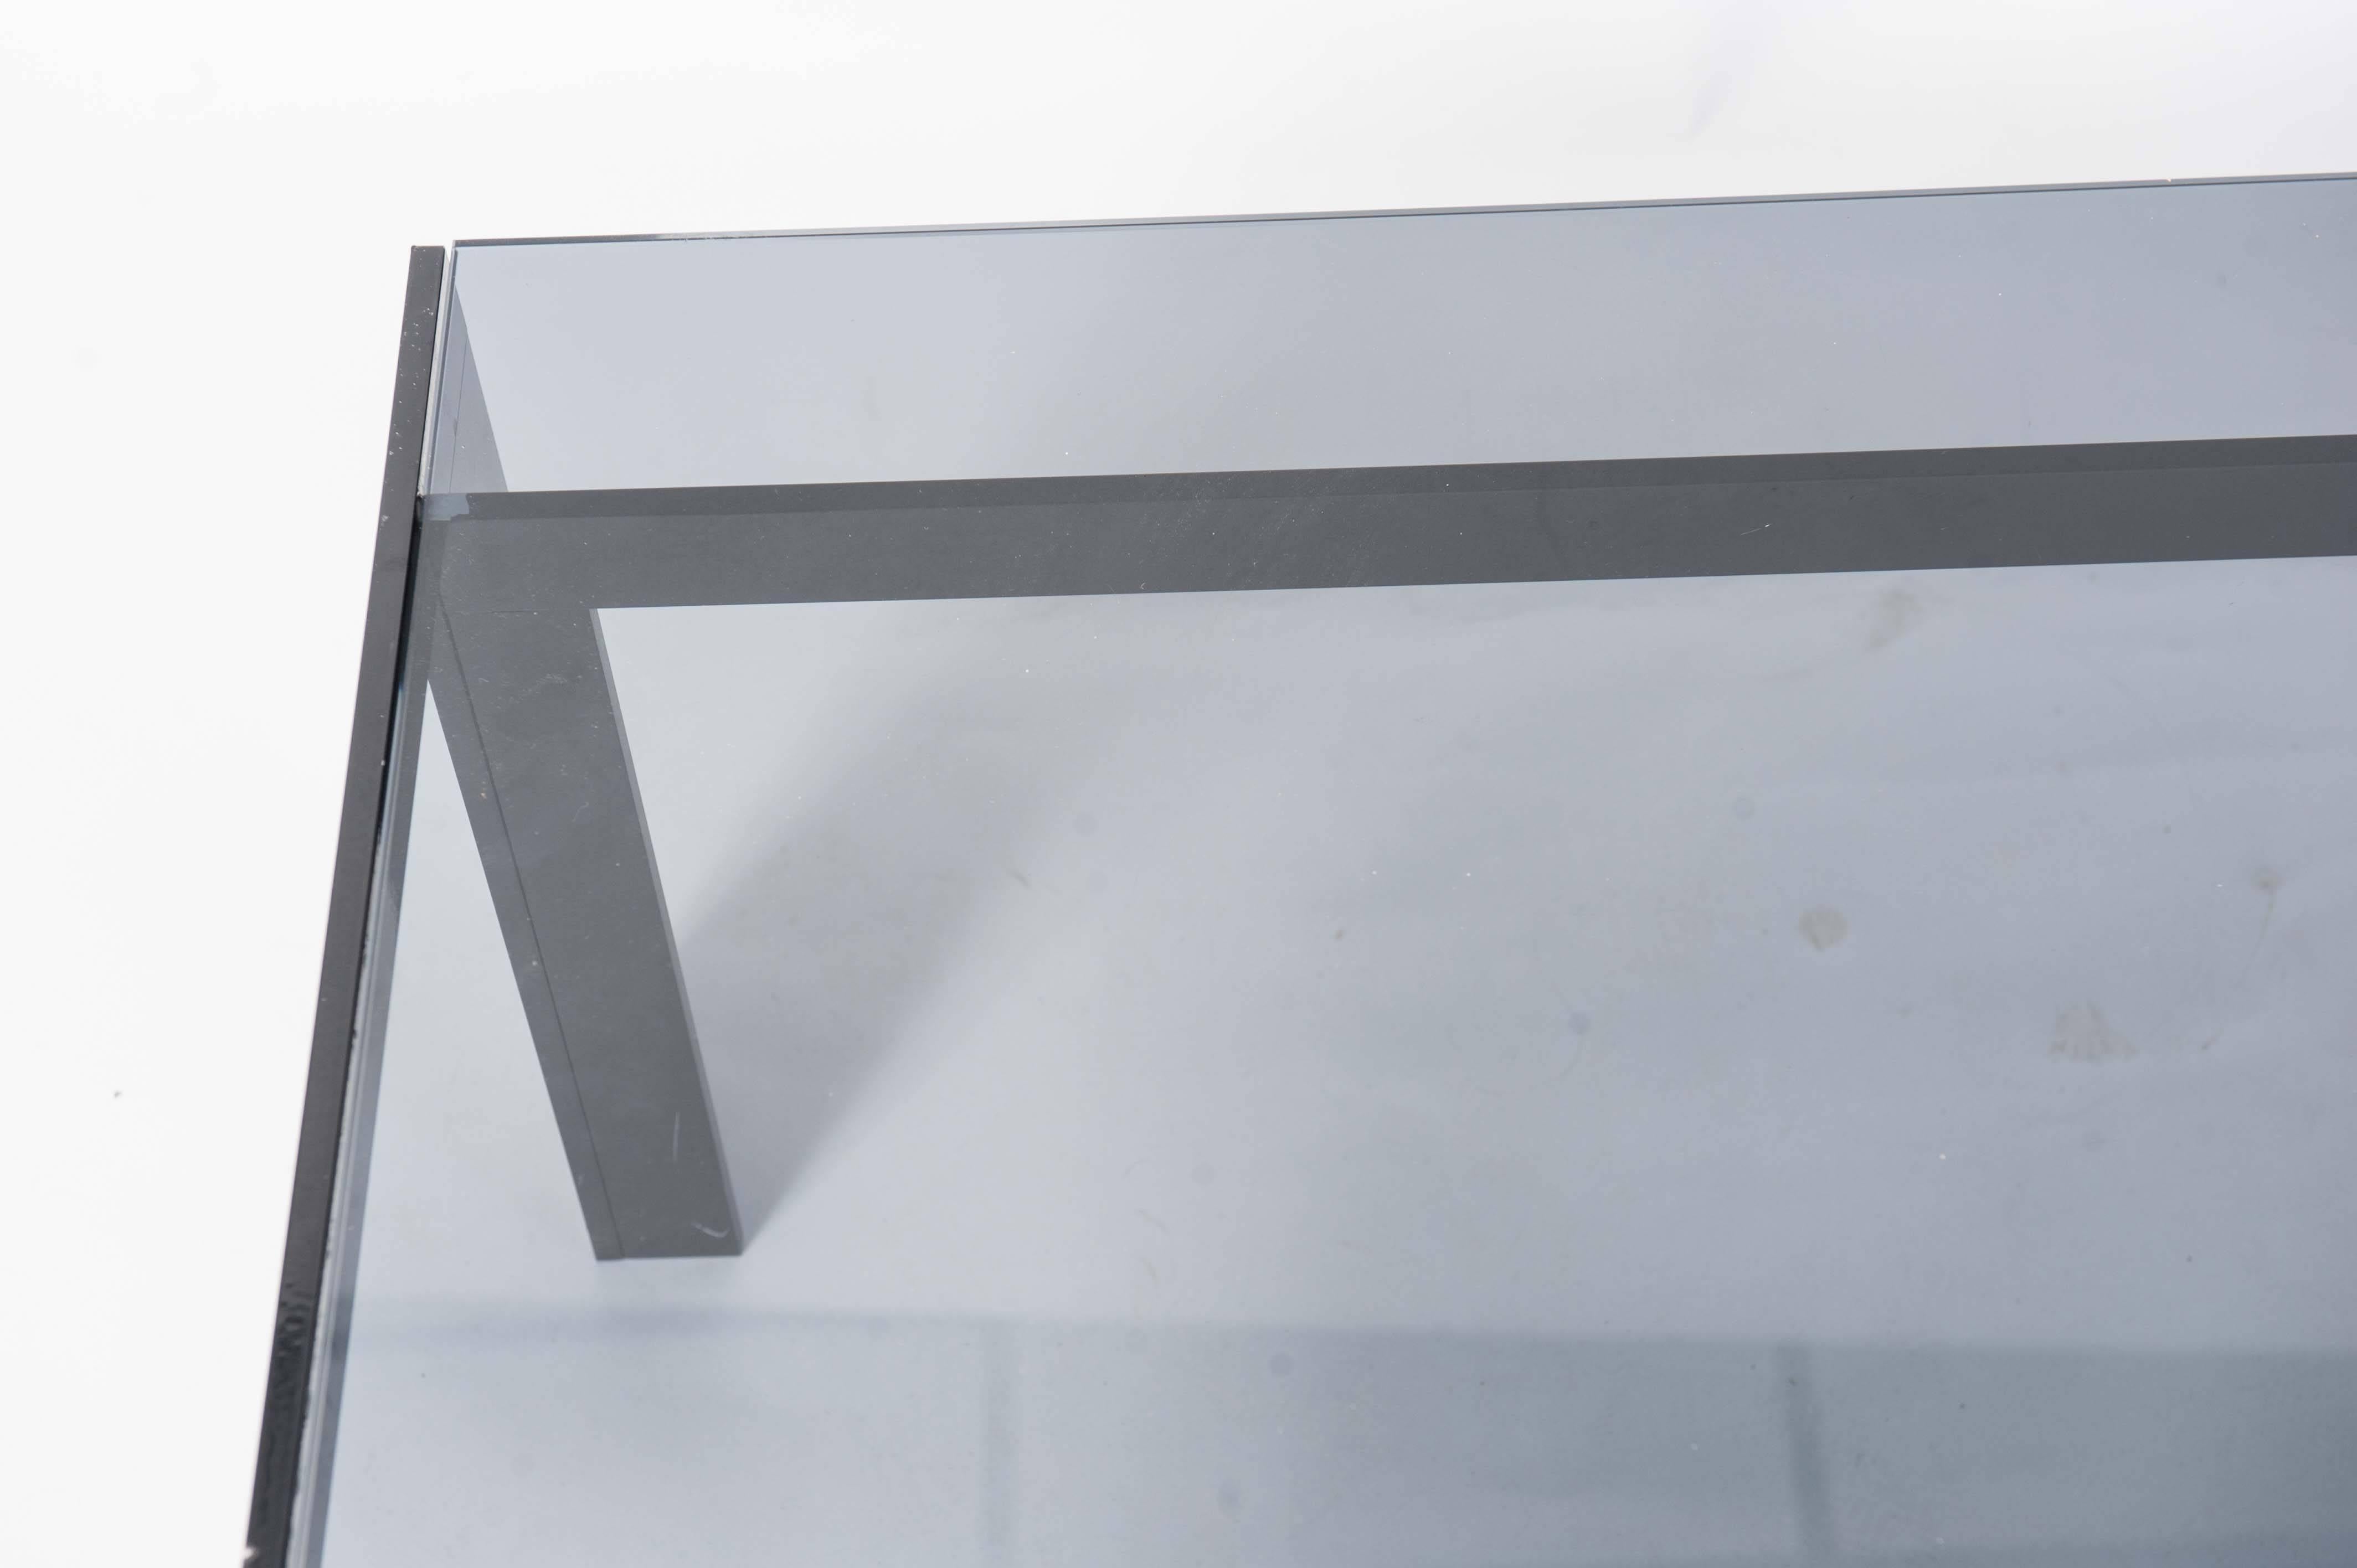 20th Century Modern Coffee Table Made of Powder Coated Black Steel and Grey Smoke Glass  